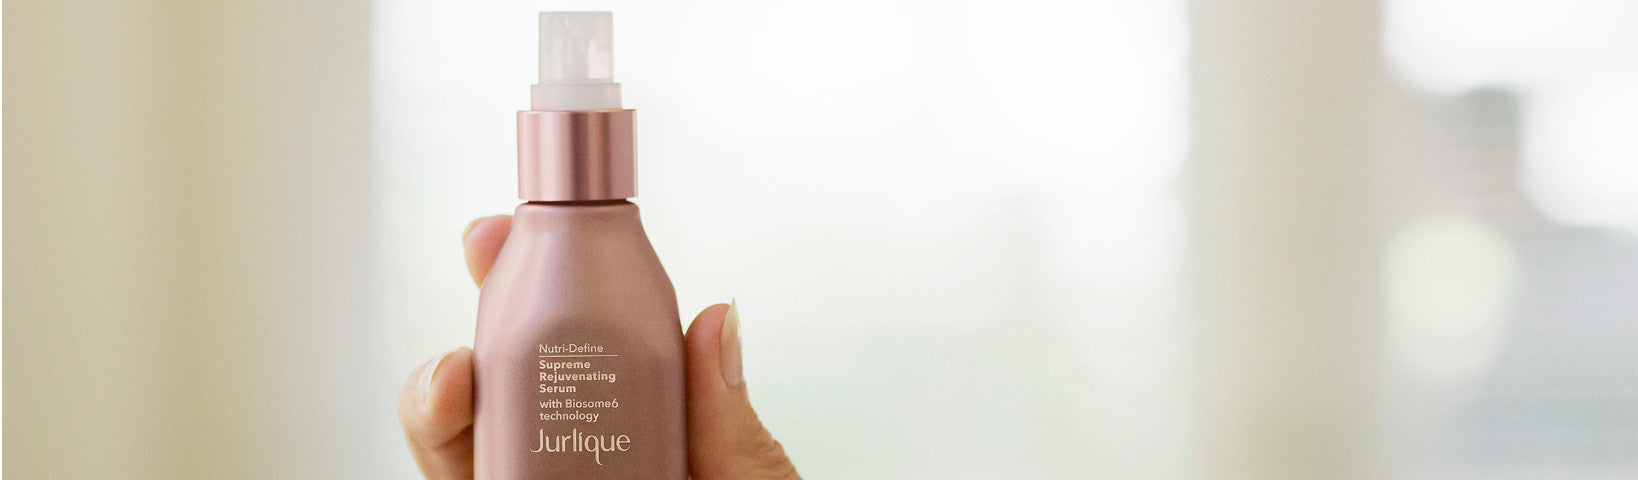 THE BEST NIGHT TIME SKIN CARE ROUTINE FOR ALL SKIN TYPES - Jurlique US